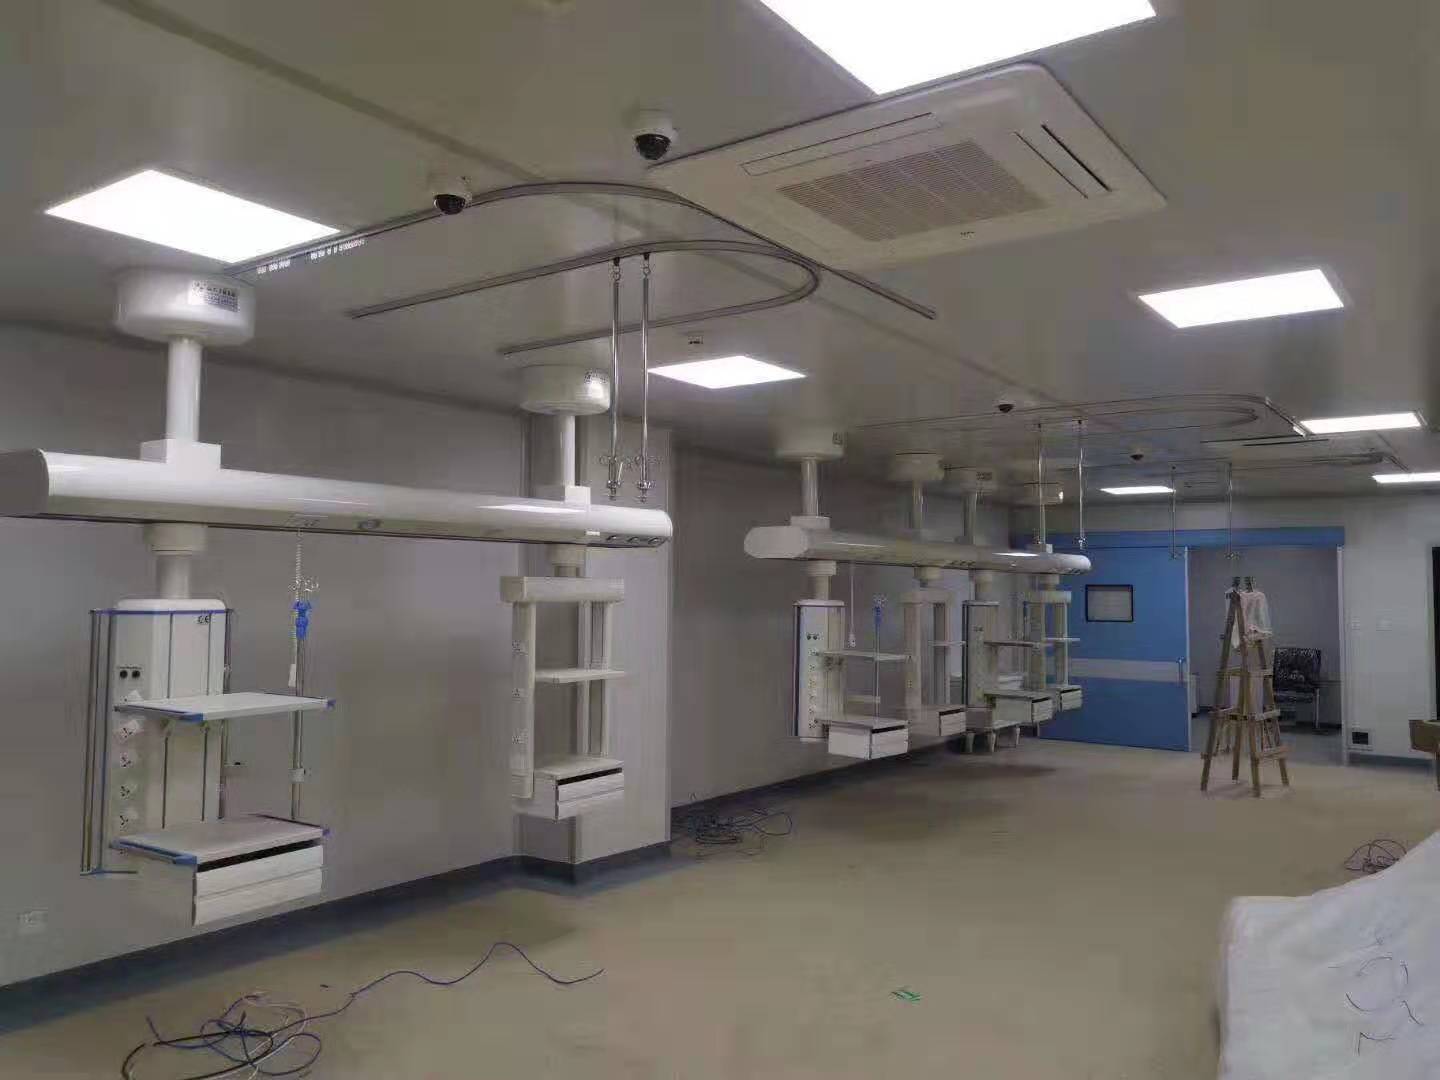 The construction of hospital laminar flow operating room purification and ICU decoration project is completed and will be delivered for use soon!